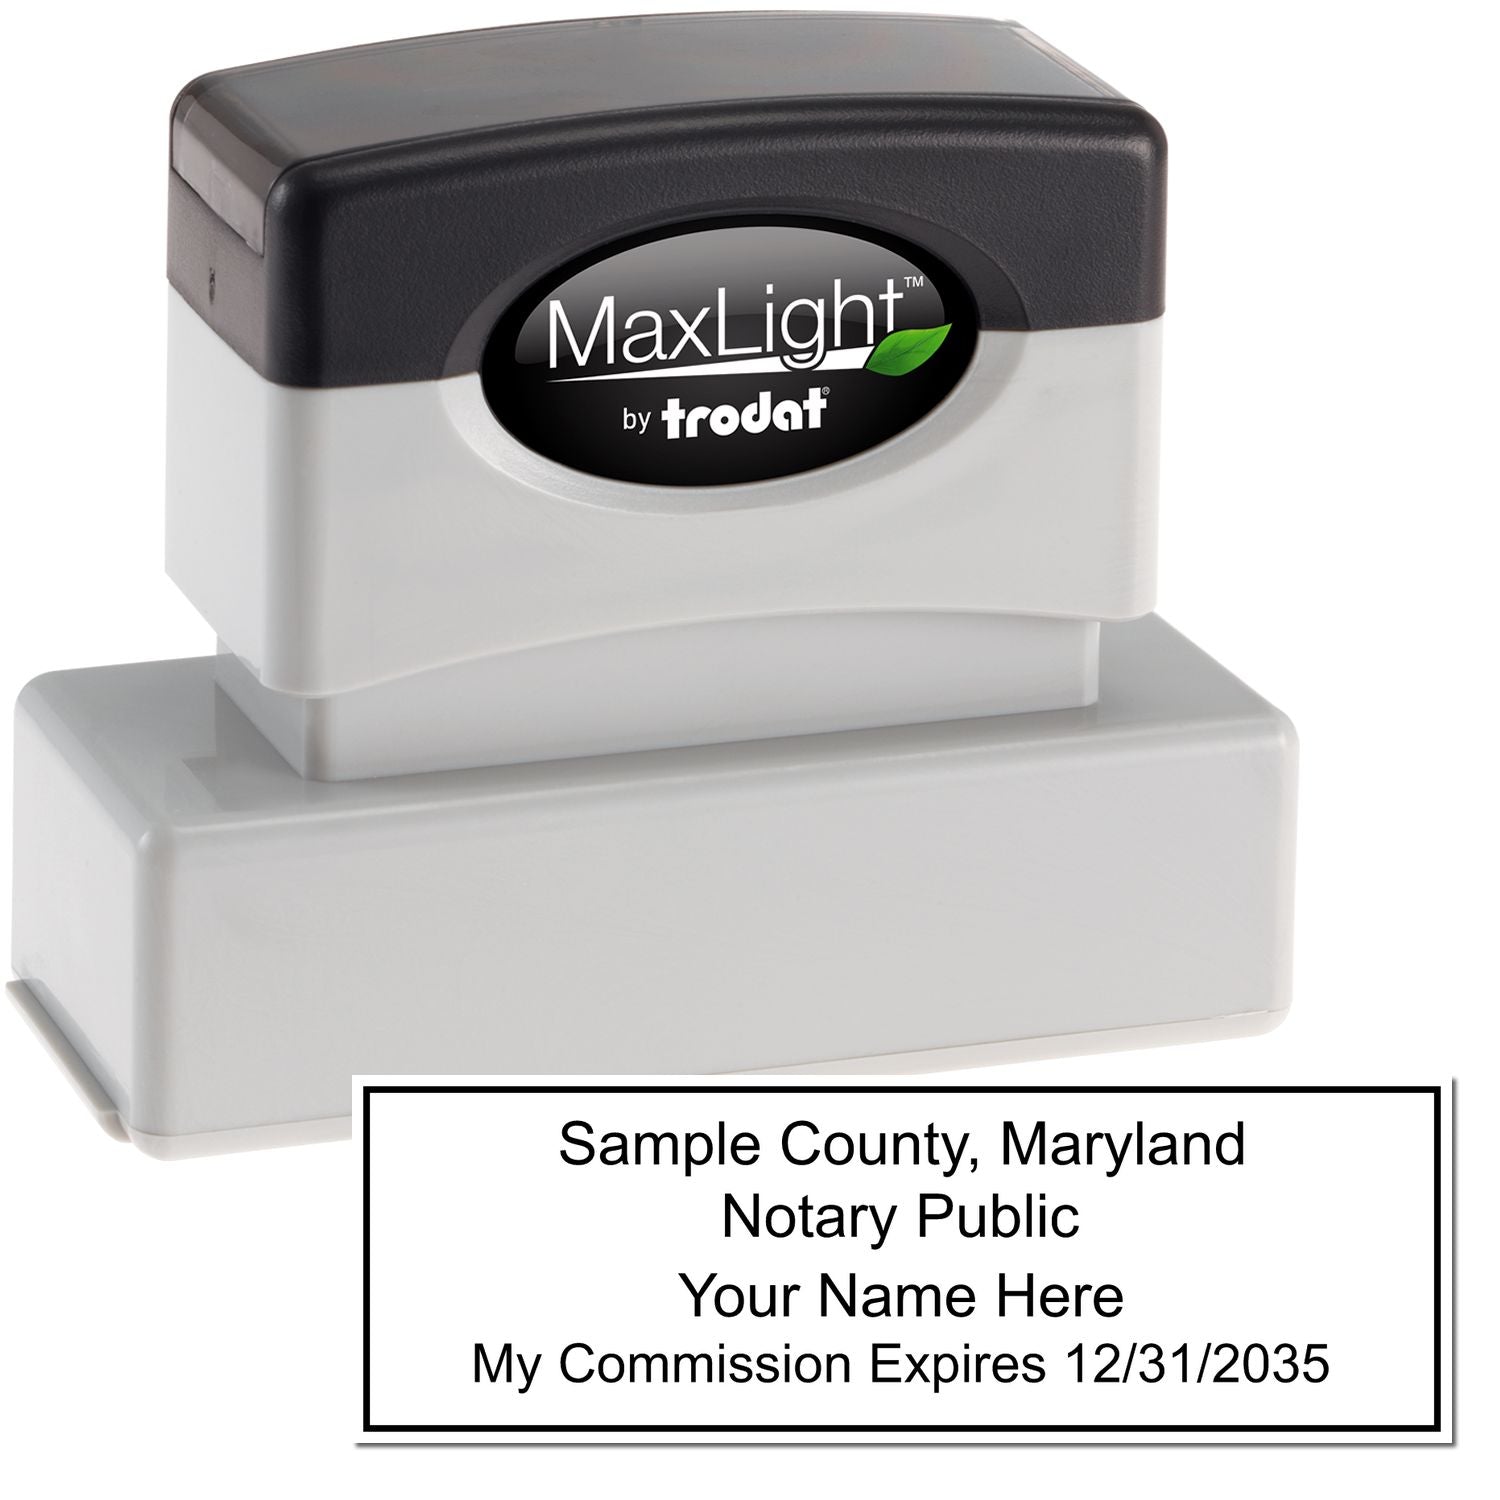 The main image for the MaxLight Premium Pre-Inked Maryland Rectangular Notarial Stamp depicting a sample of the imprint and electronic files